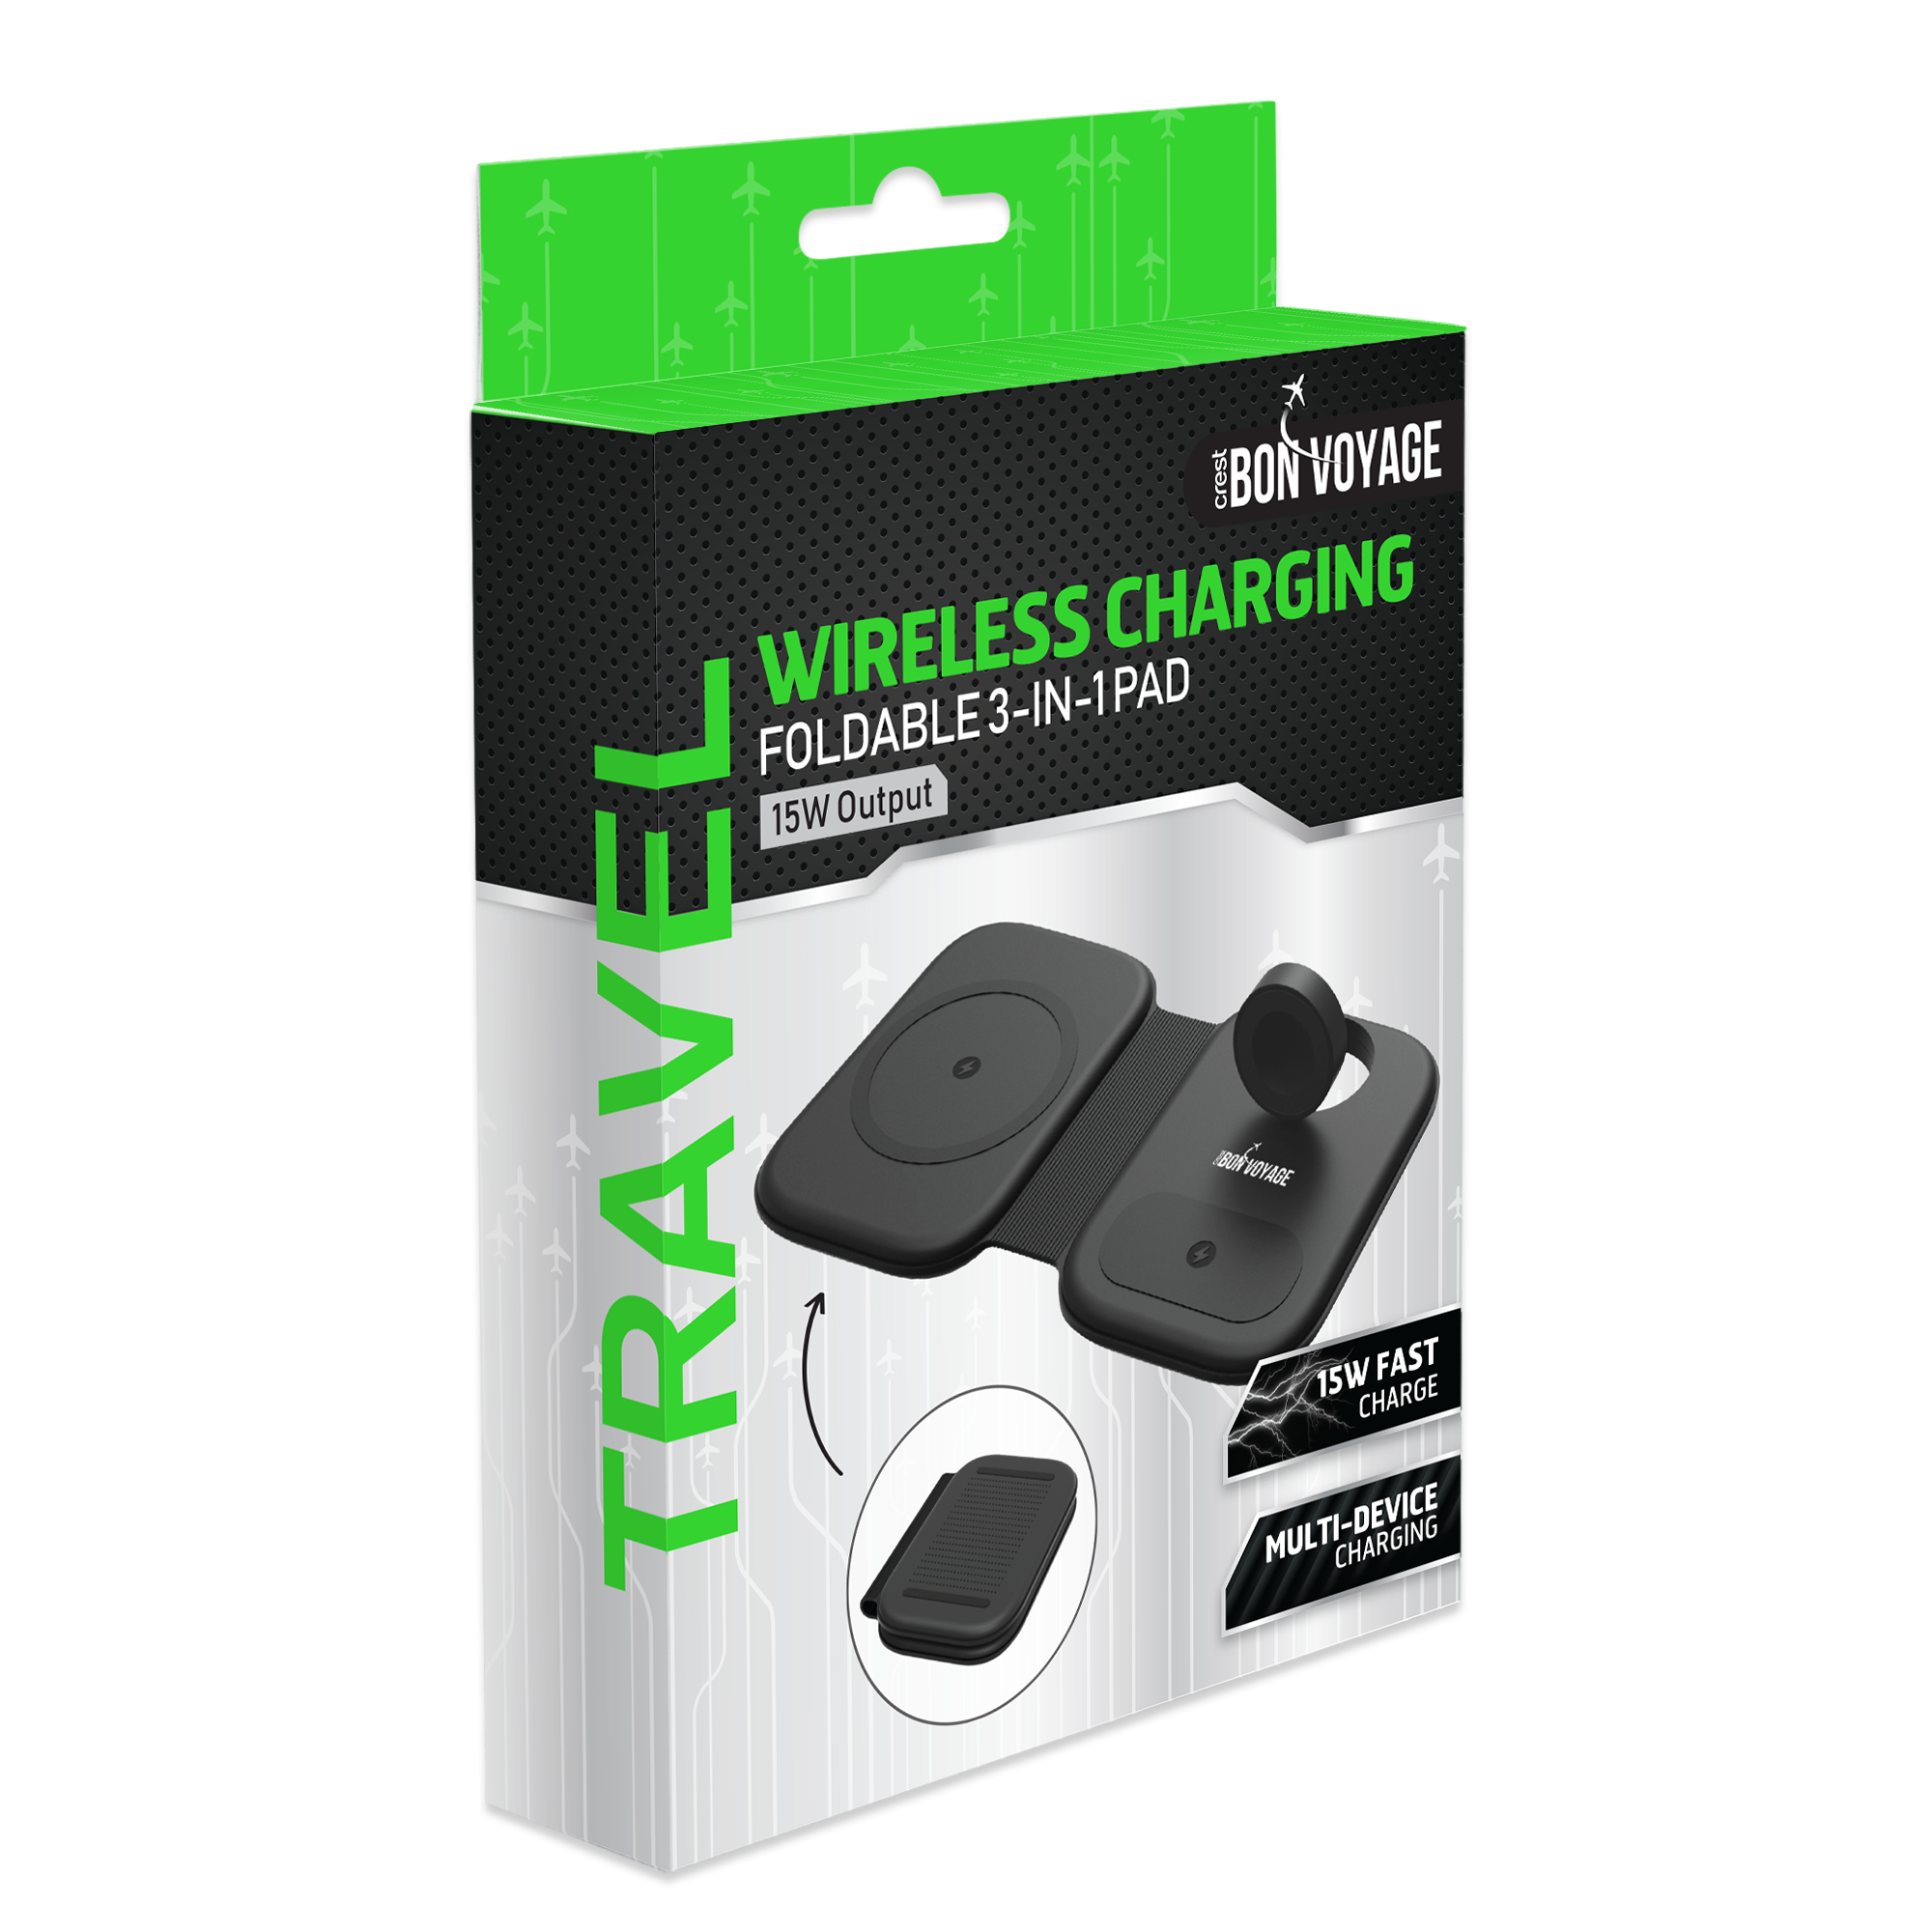 Bon Voyage WIRELESS CHARGING Foldable 3-in-1 Pad